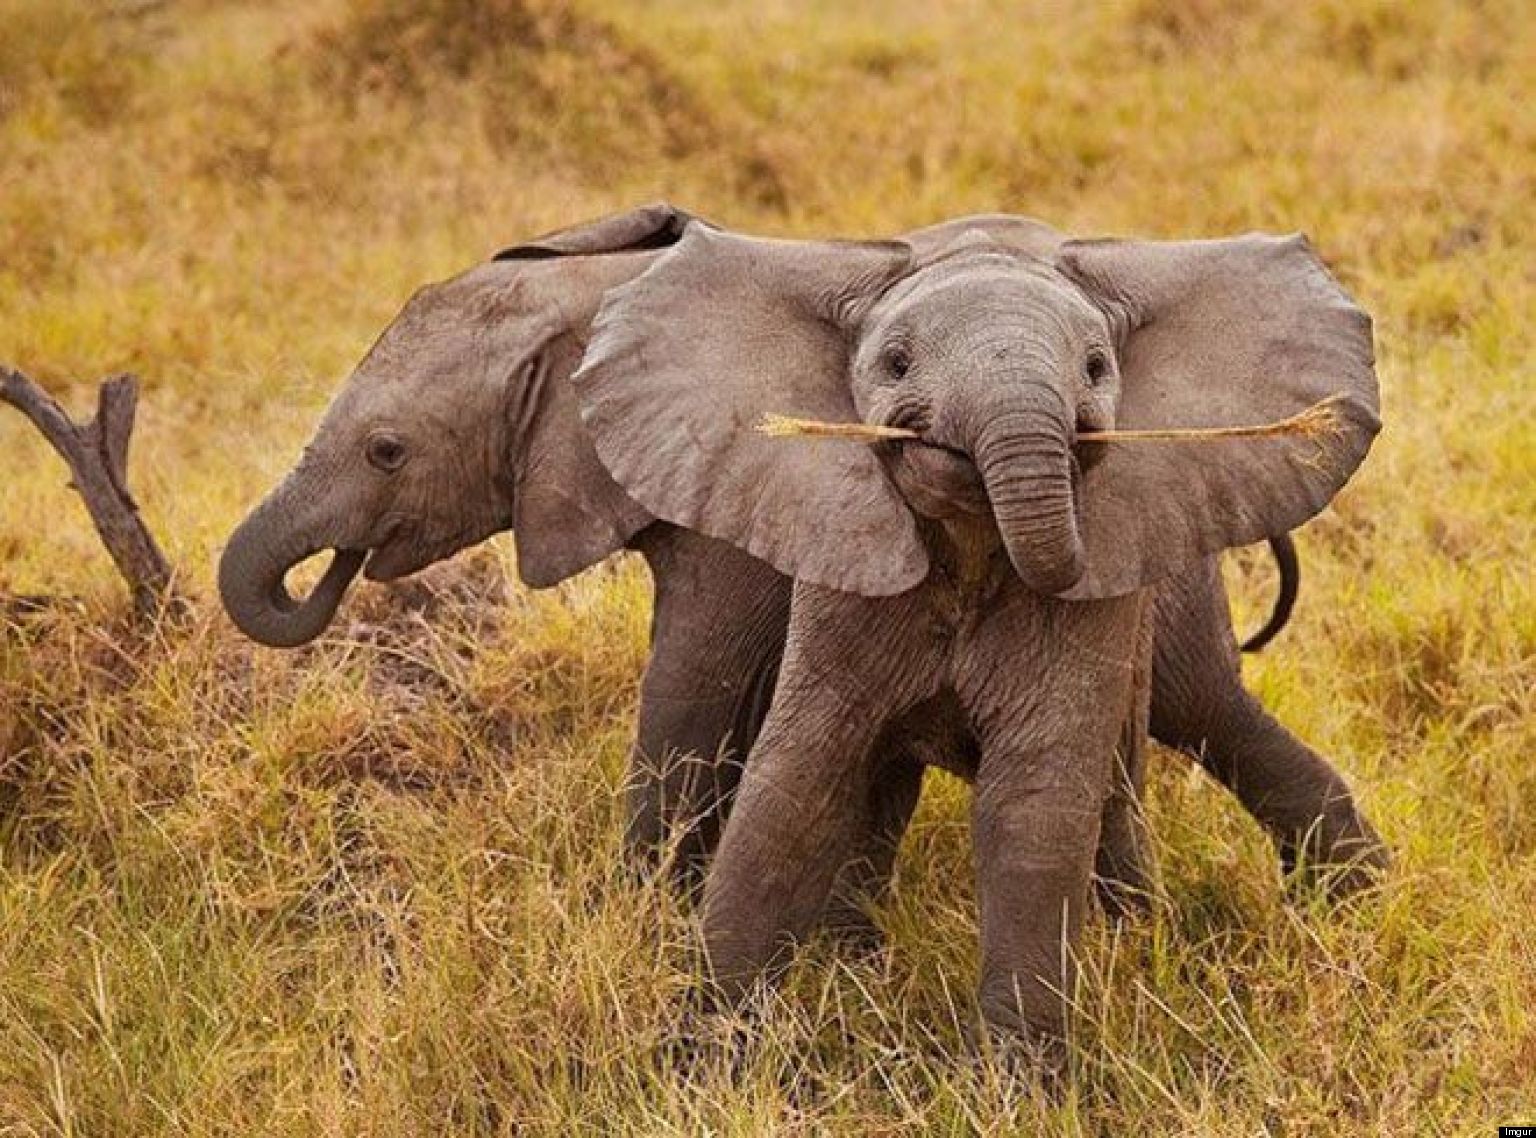 Smiling Baby Elephant Is The Cutest (PHOTO) | HuffPost - photo#10